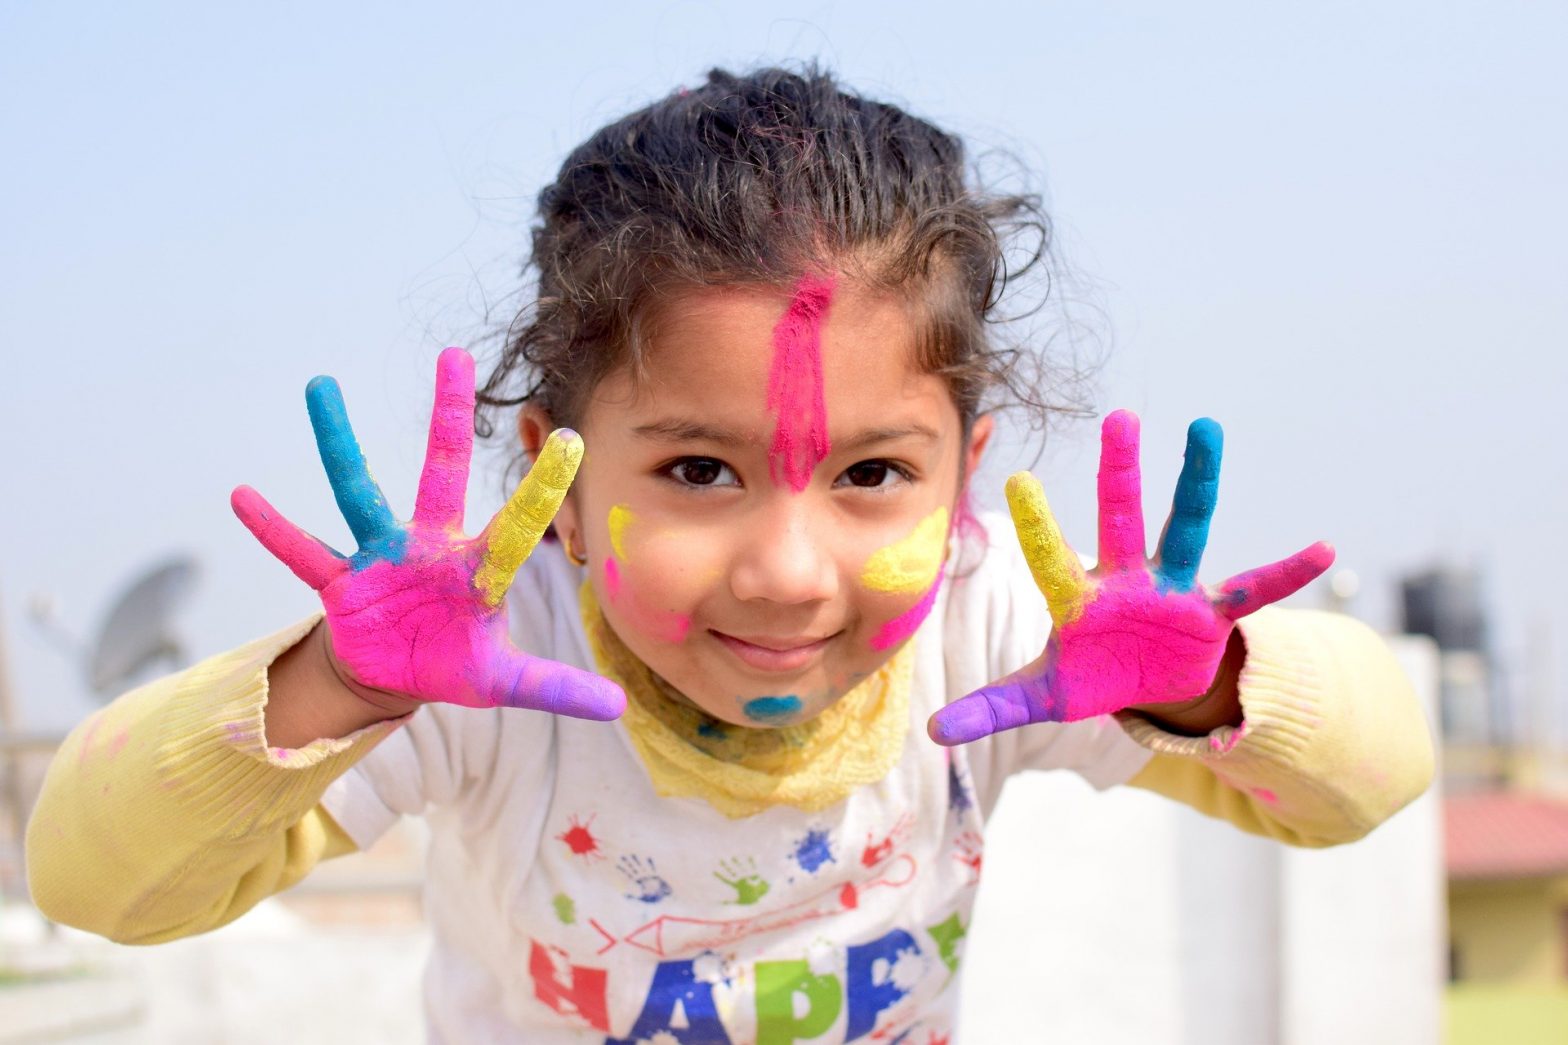 Child in a childcare center who has been finger-painting as part of a flex scheduling program